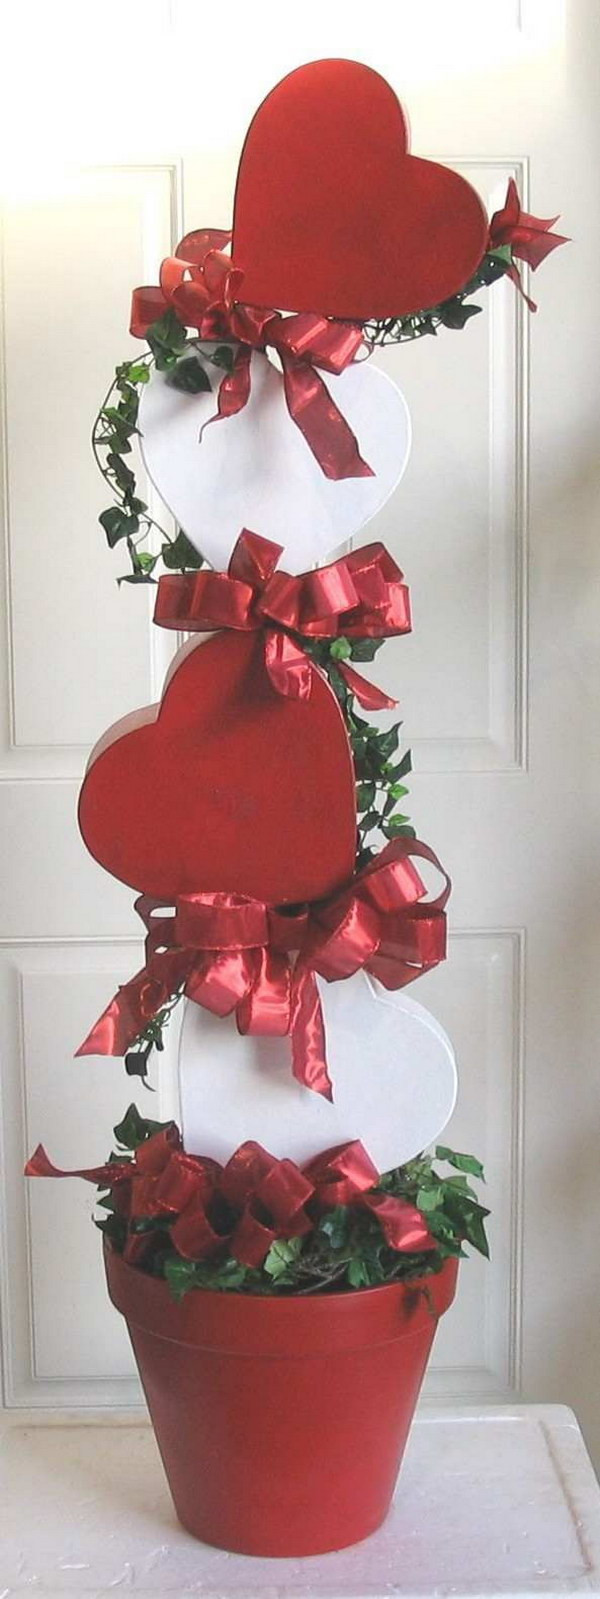 Valentines Decorations DIY
 30 Best Ideas For Valentines Day Hative